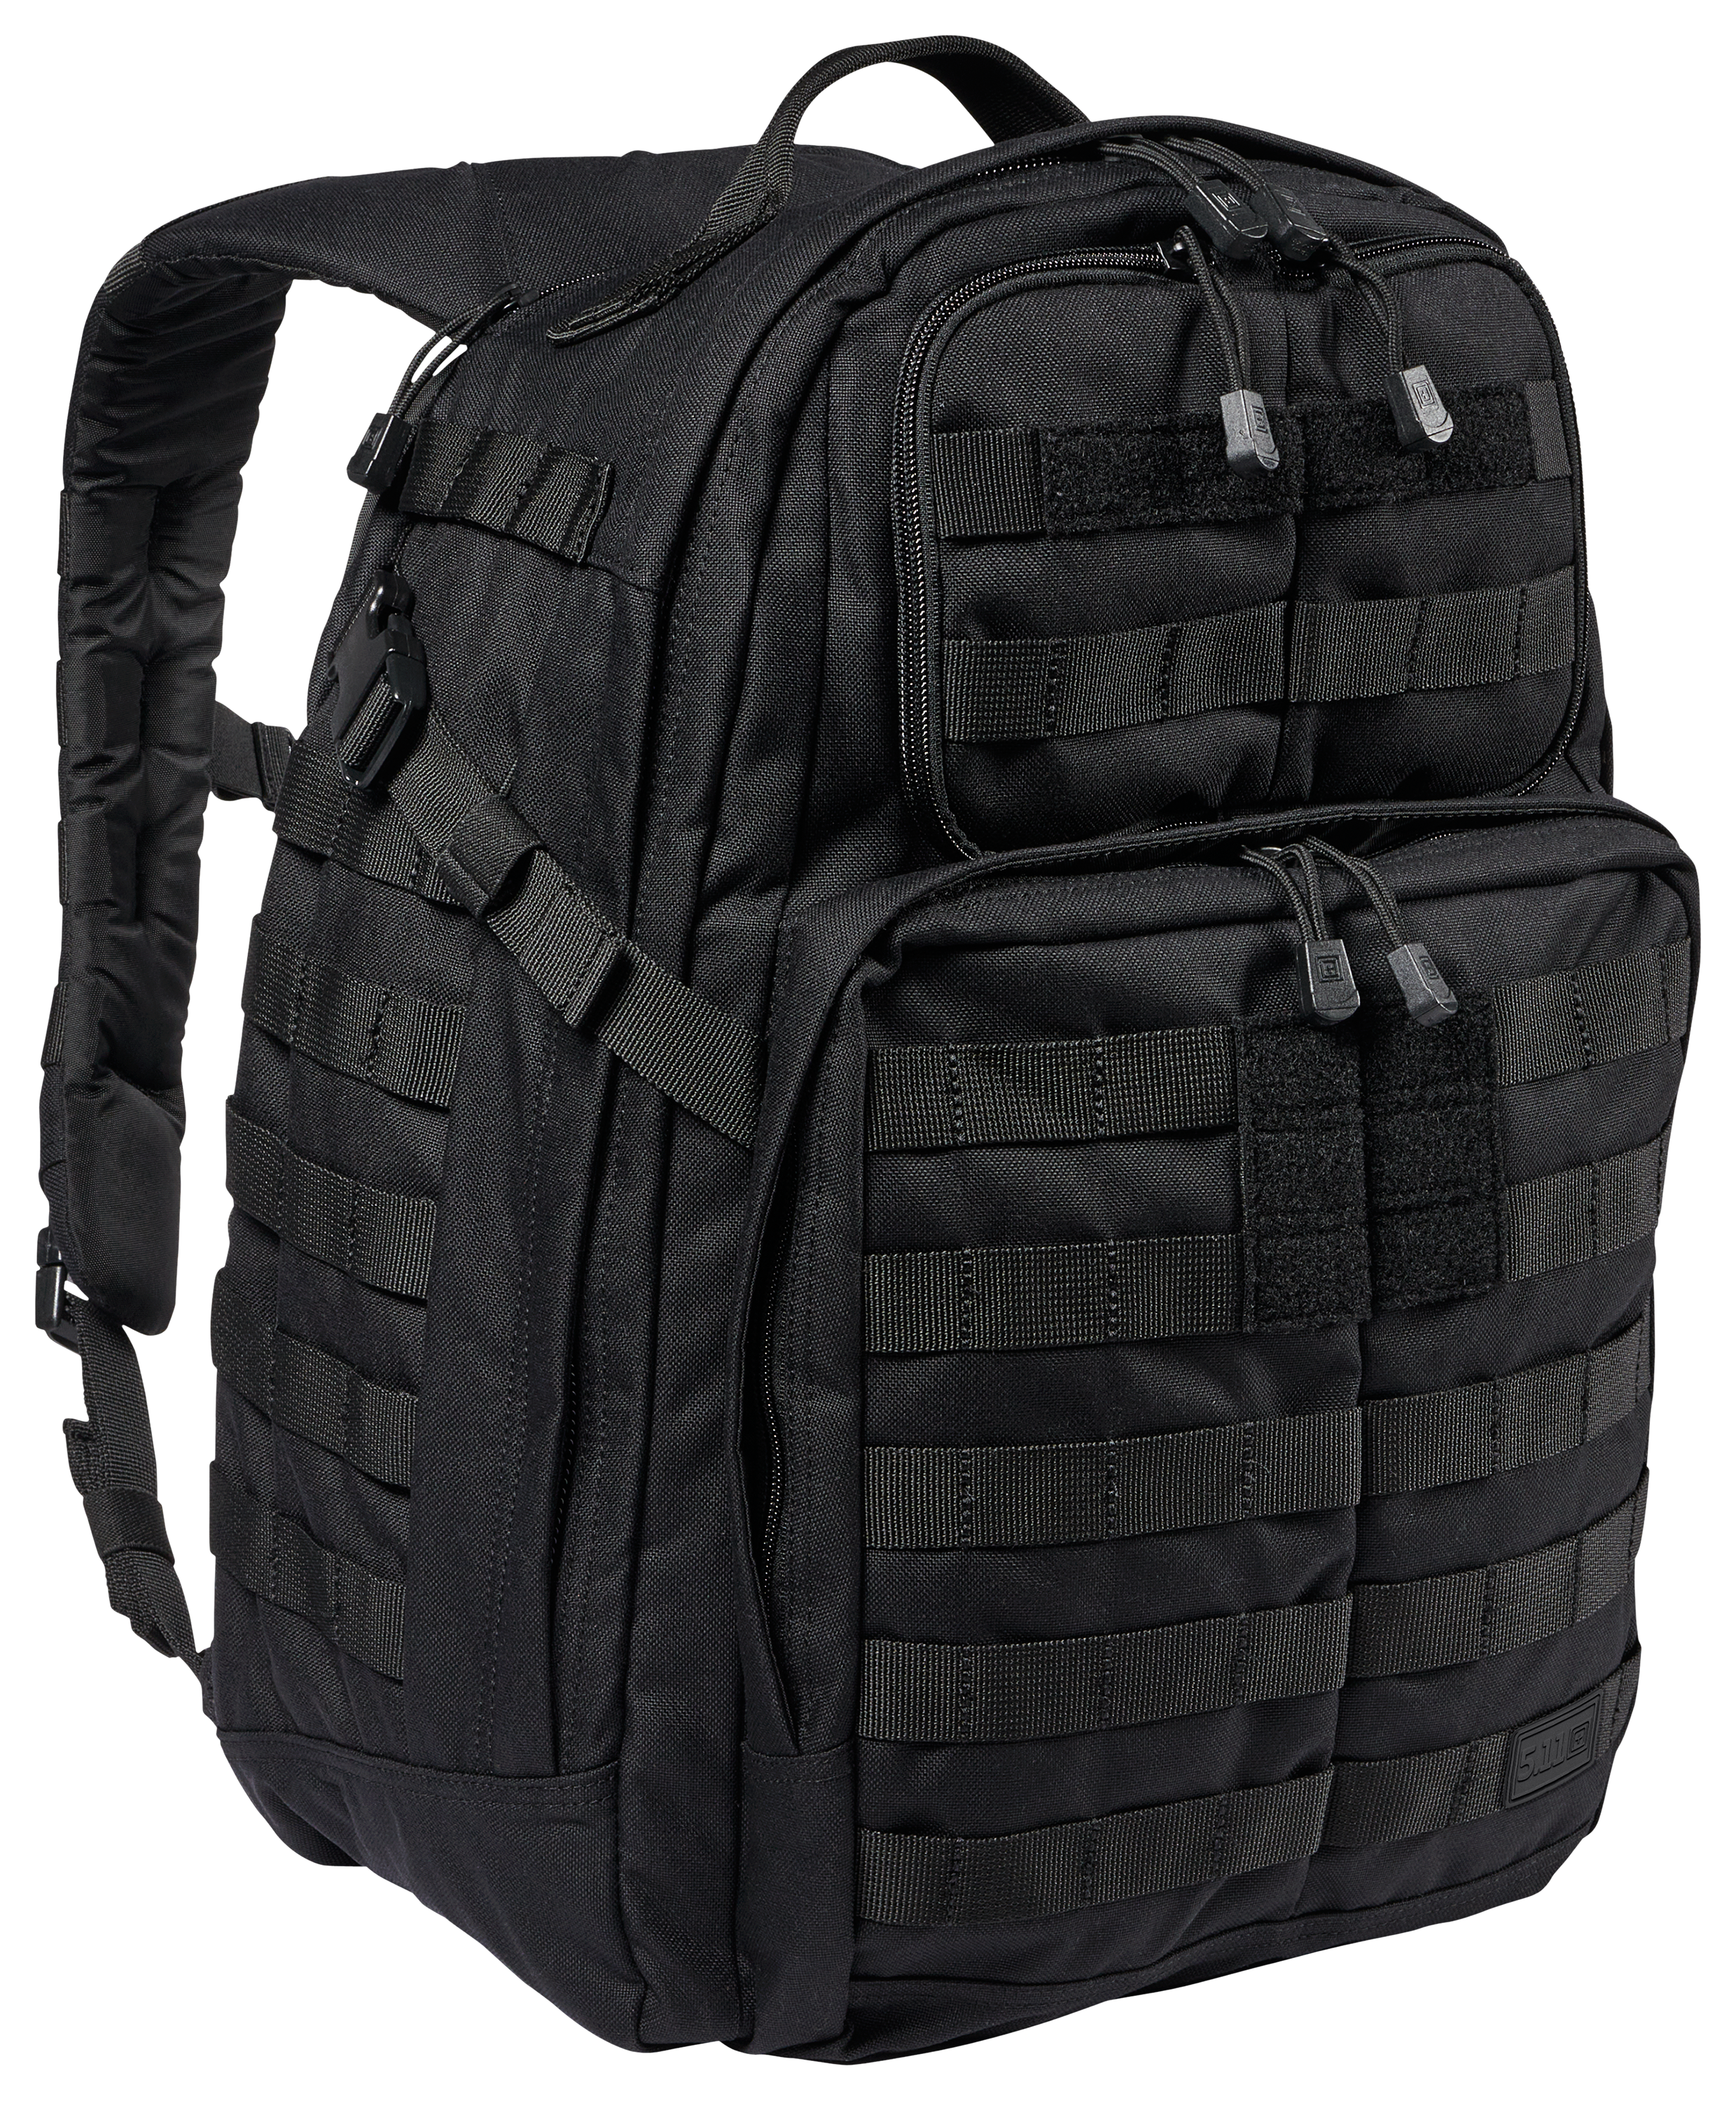 5.11 Tactical Rush24 2.0 Backpack | Cabela's